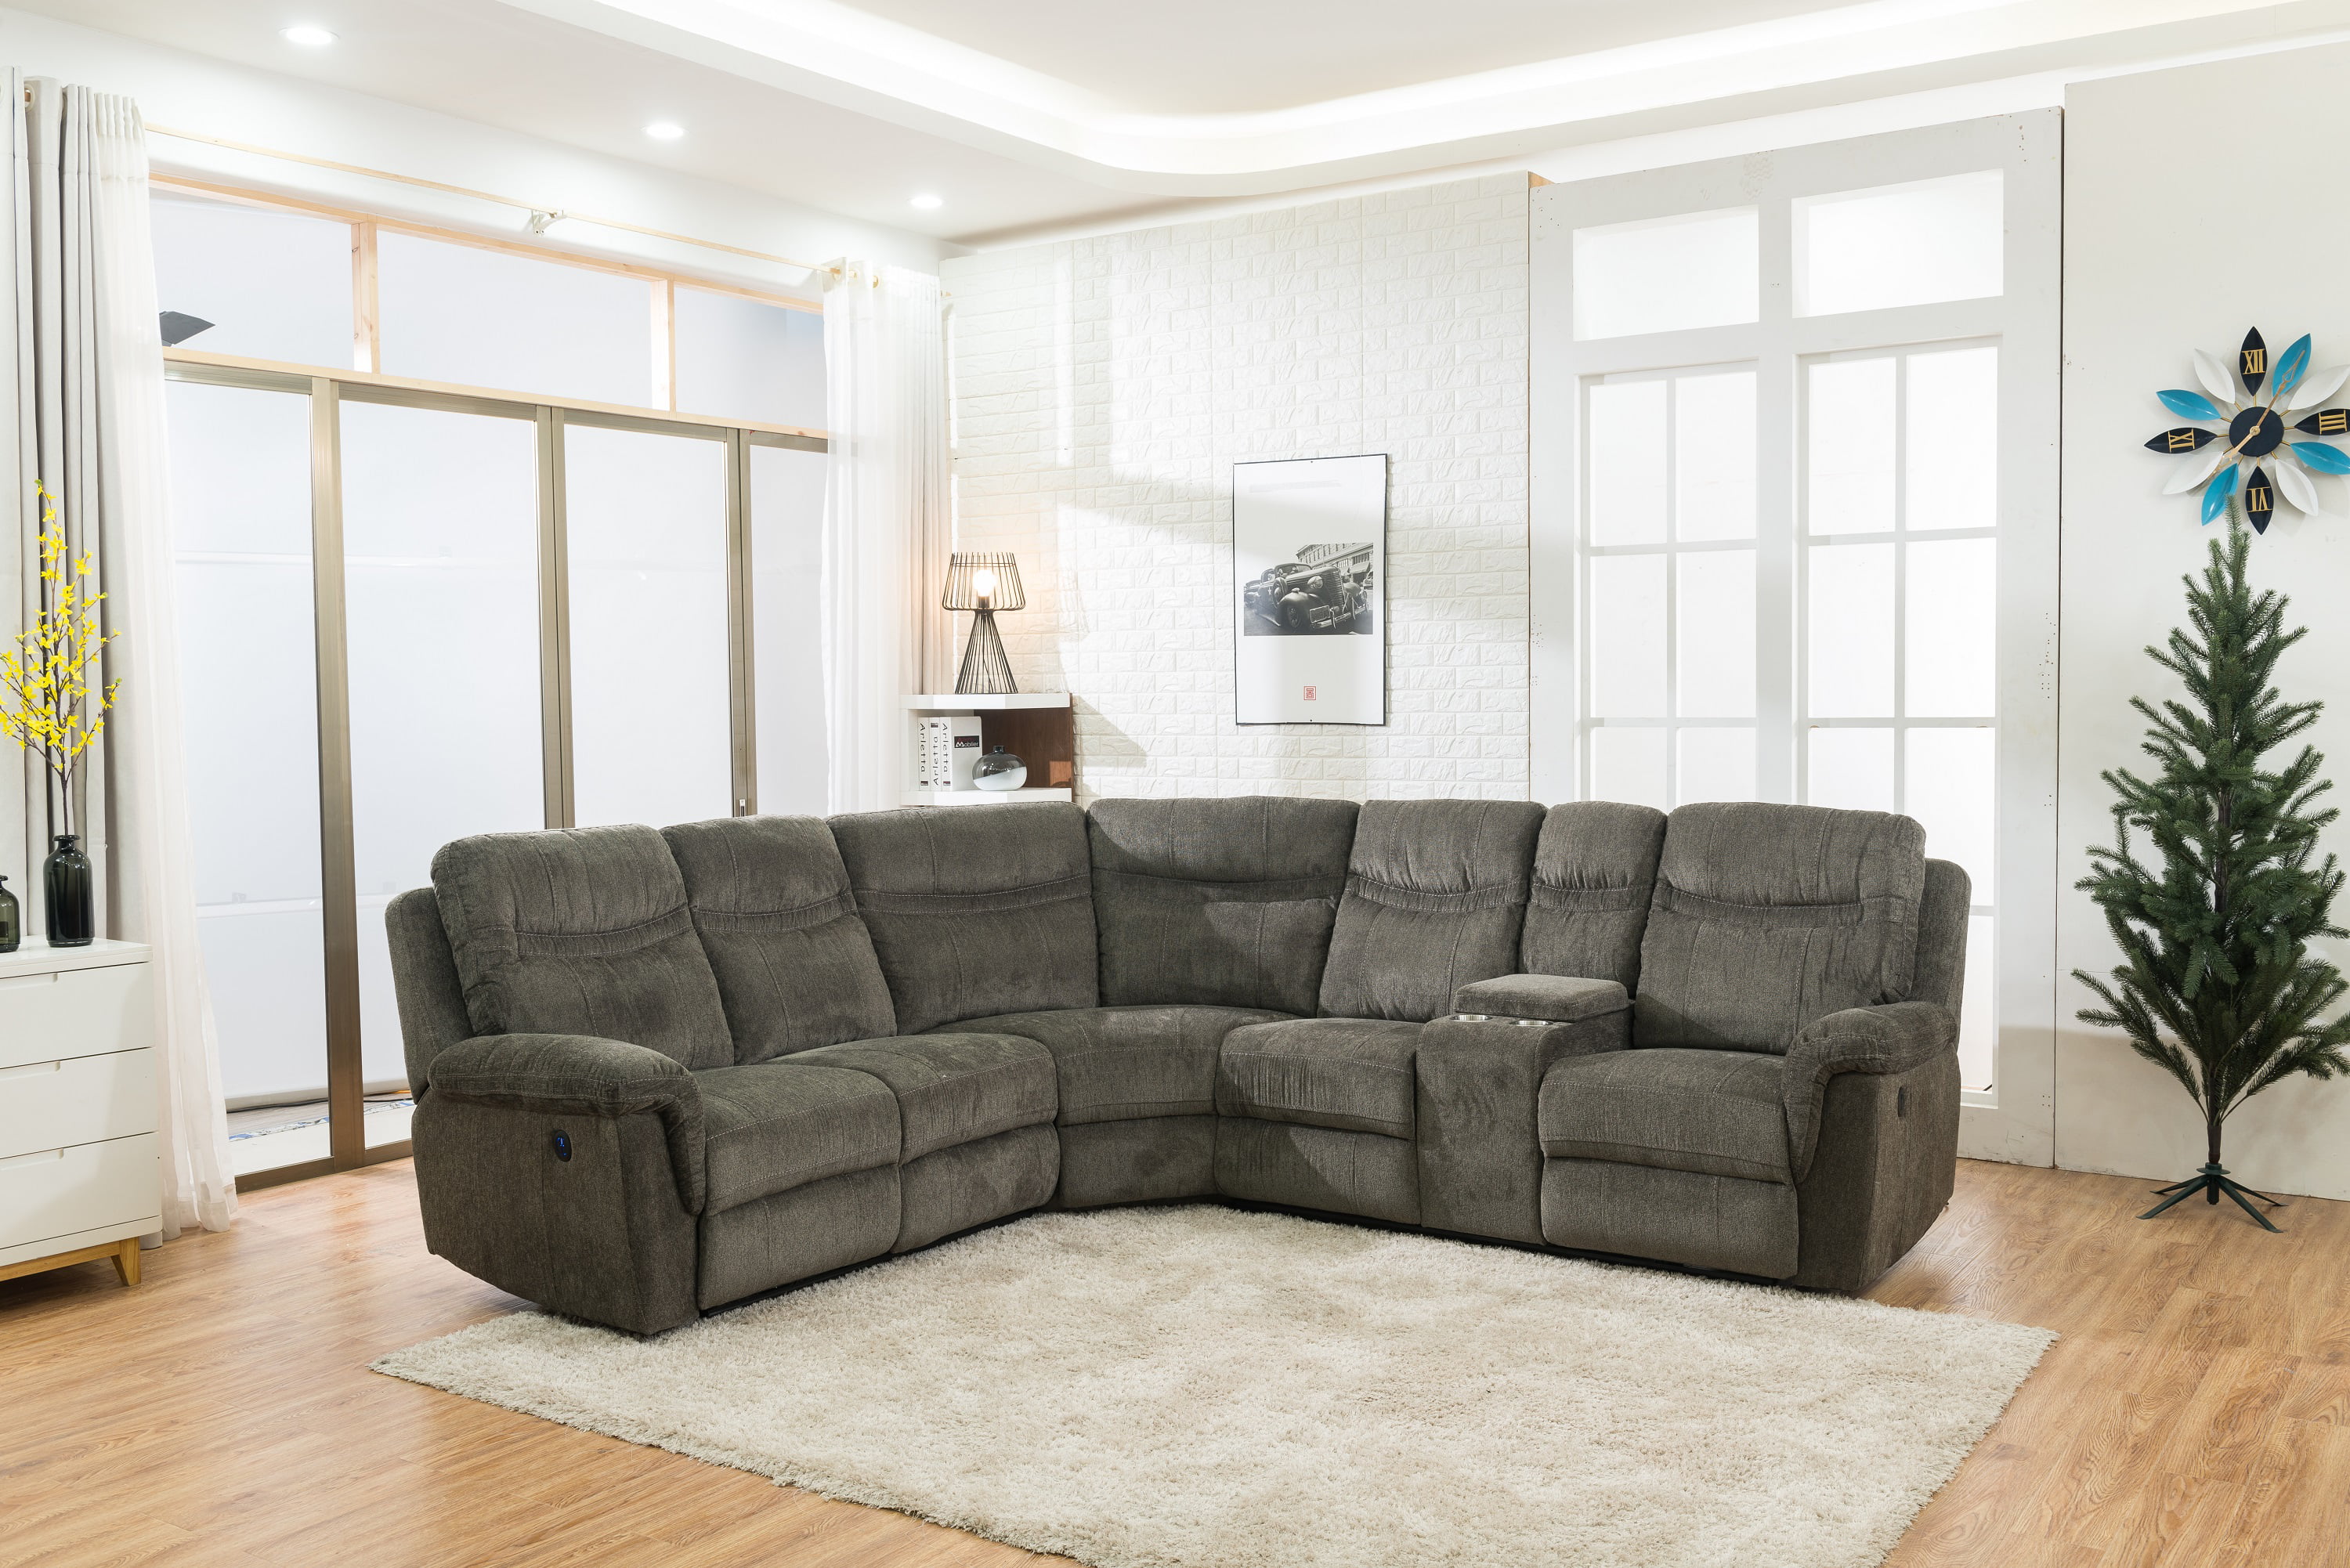 Low Price For Living Room Set